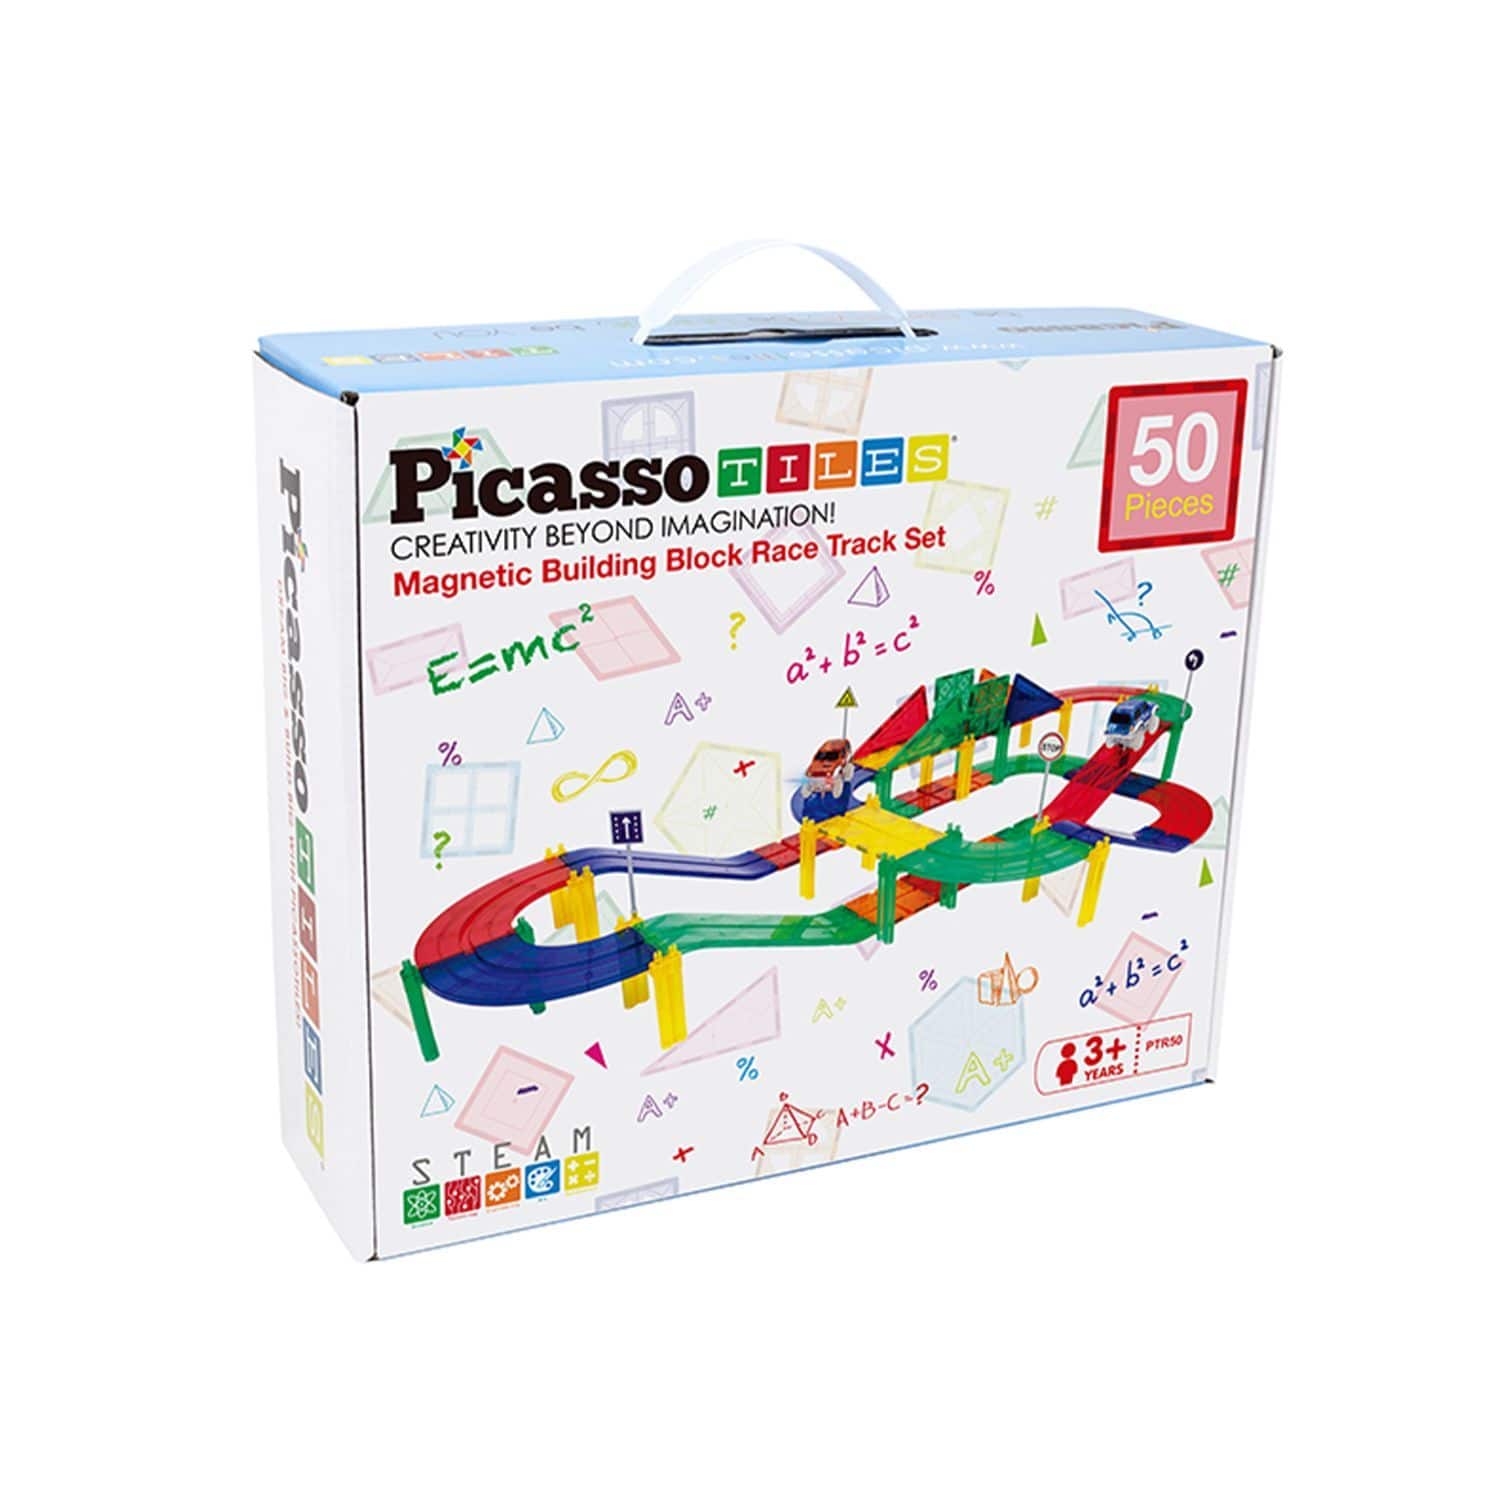 https://media-www.canadiantire.ca/product/seasonal-gardening/toys/toys-games/1500668/picasso-tiles-50pc-magnetic-race-track-dc9016ae-d0bf-47db-8eaa-55acc2103e45-jpgrendition.jpg